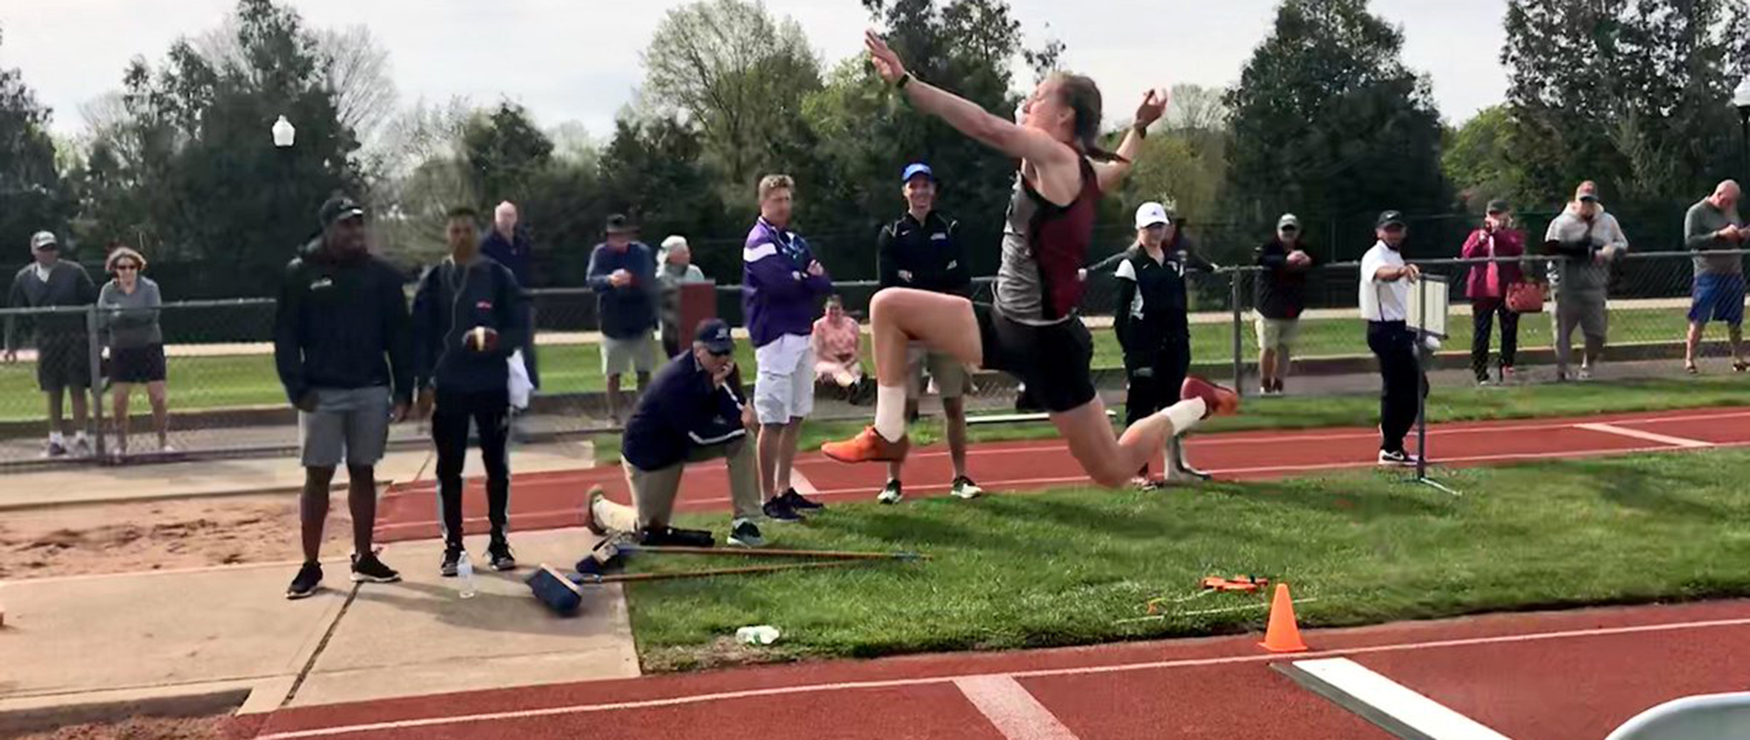 Women’s Track & Field Finishes Ninth at NE10 Championships